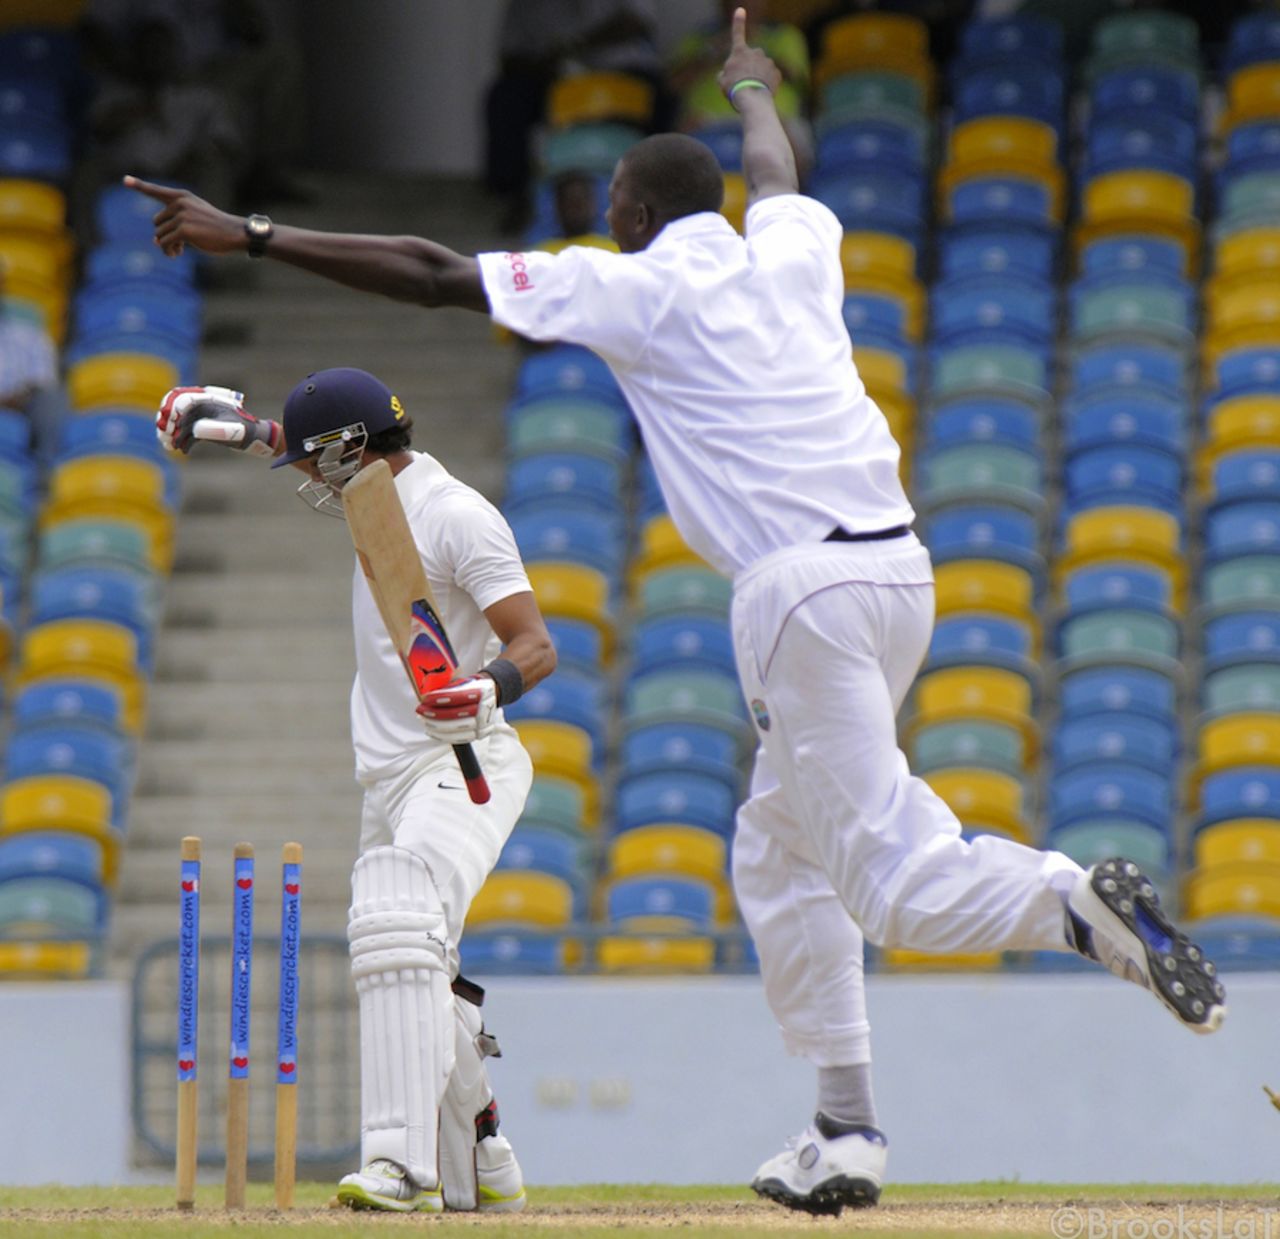 Manoj Tiwary was bowled by a Jason Holder delivery, West Indies A v India A, 1st unofficial Test, Barbados, 4th day, June 5, 2012